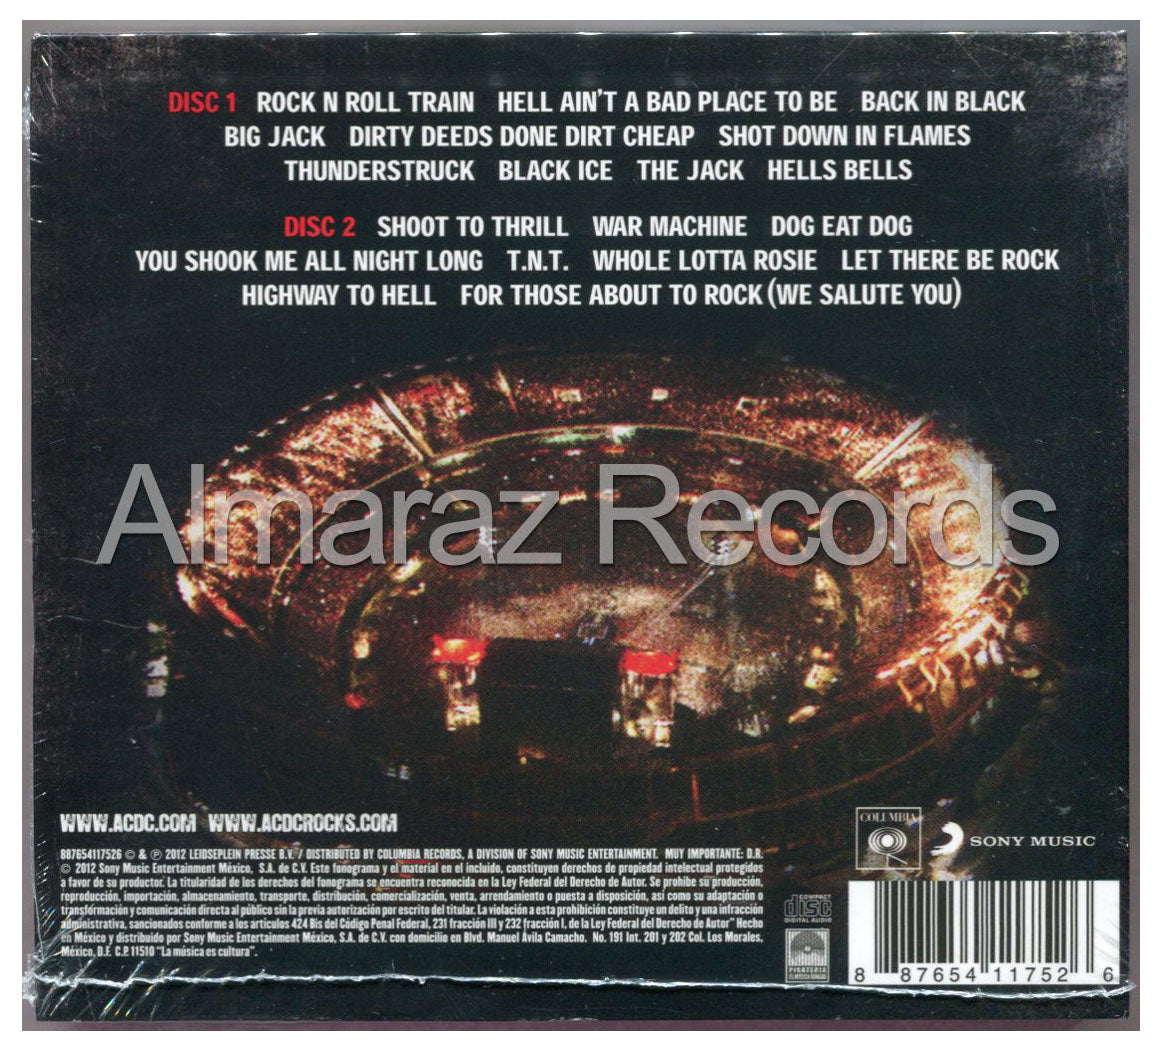 AC/DC Live At River Plate 2CD